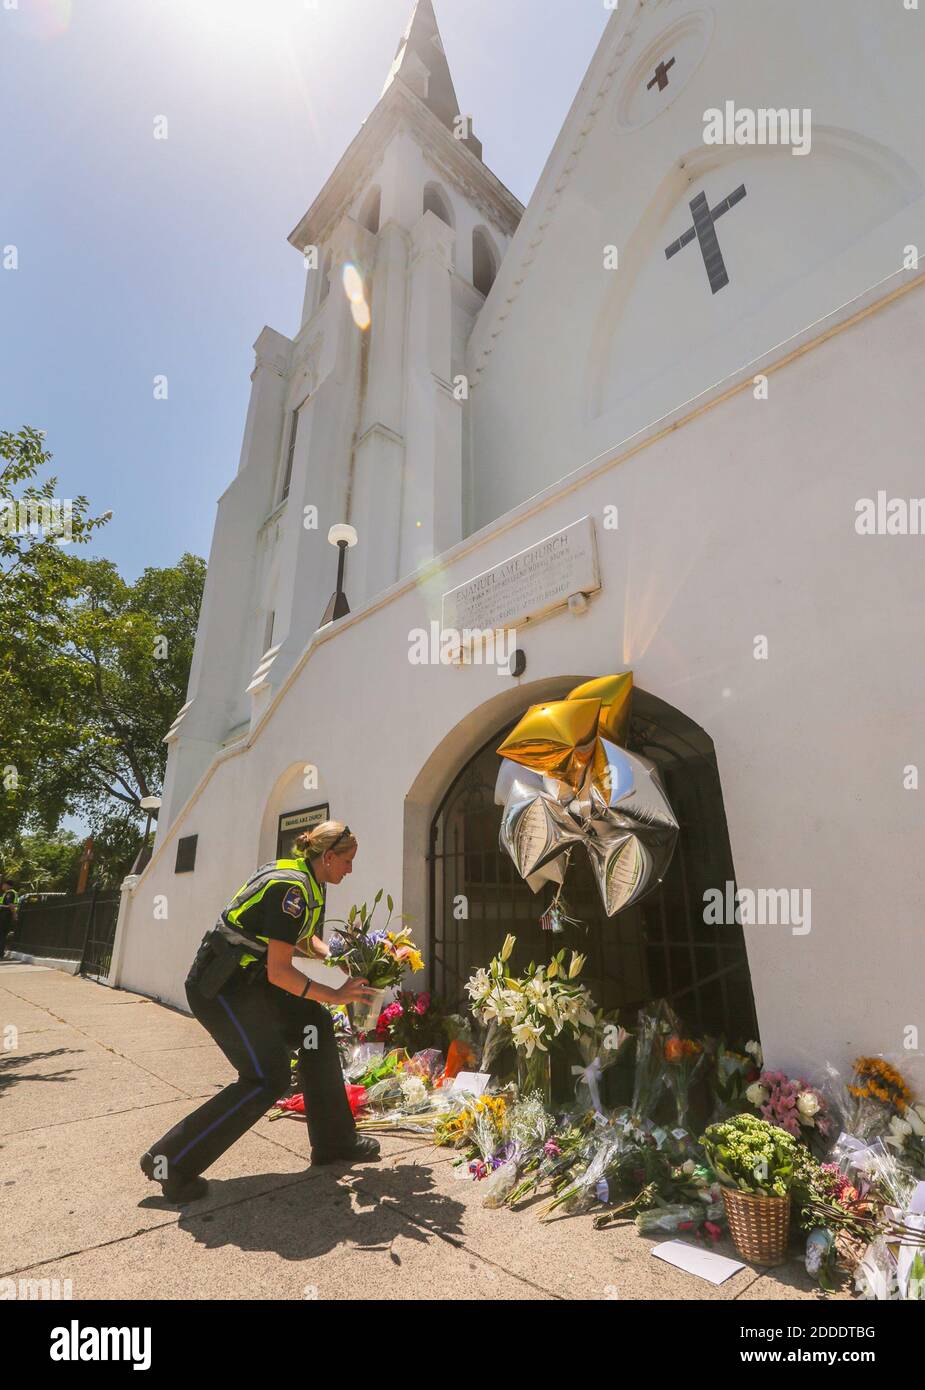 NO FILM, NO VIDEO, NO TV, NO DOCUMENTARY - Charleston City Police Officer T. Graves transfers flowers that were left on the corner of Calhoun Street to the front of Emanuel AME Church on June 18, 2015, where nine people were shot to death in Charleston, SC, USA. Photo by Tim Dominick/The State/TNS/ABACAPRESS.COM Stock Photo